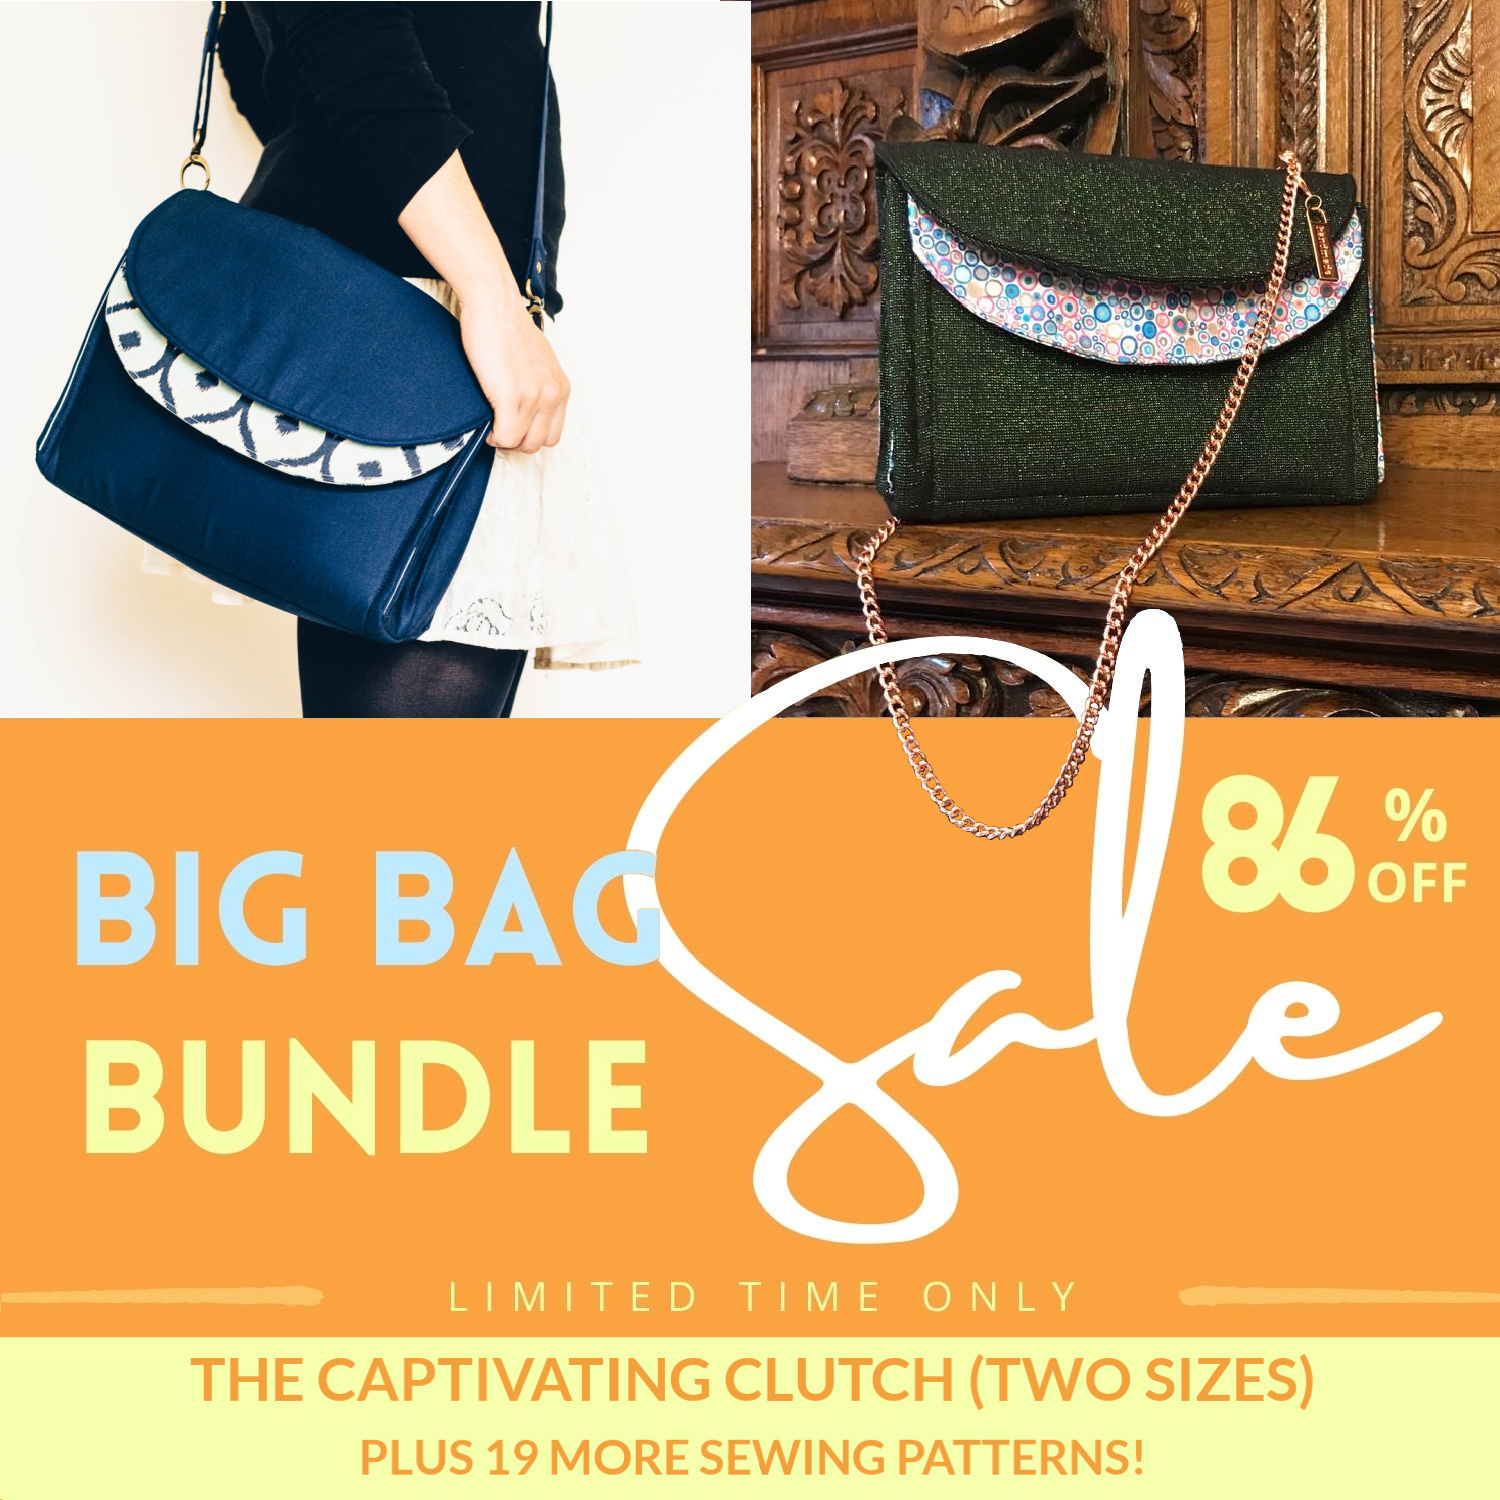 Big Bag Bundle sale 86% discount, featuring the Captivating Clutch from Sewing Patterns by Mrs H